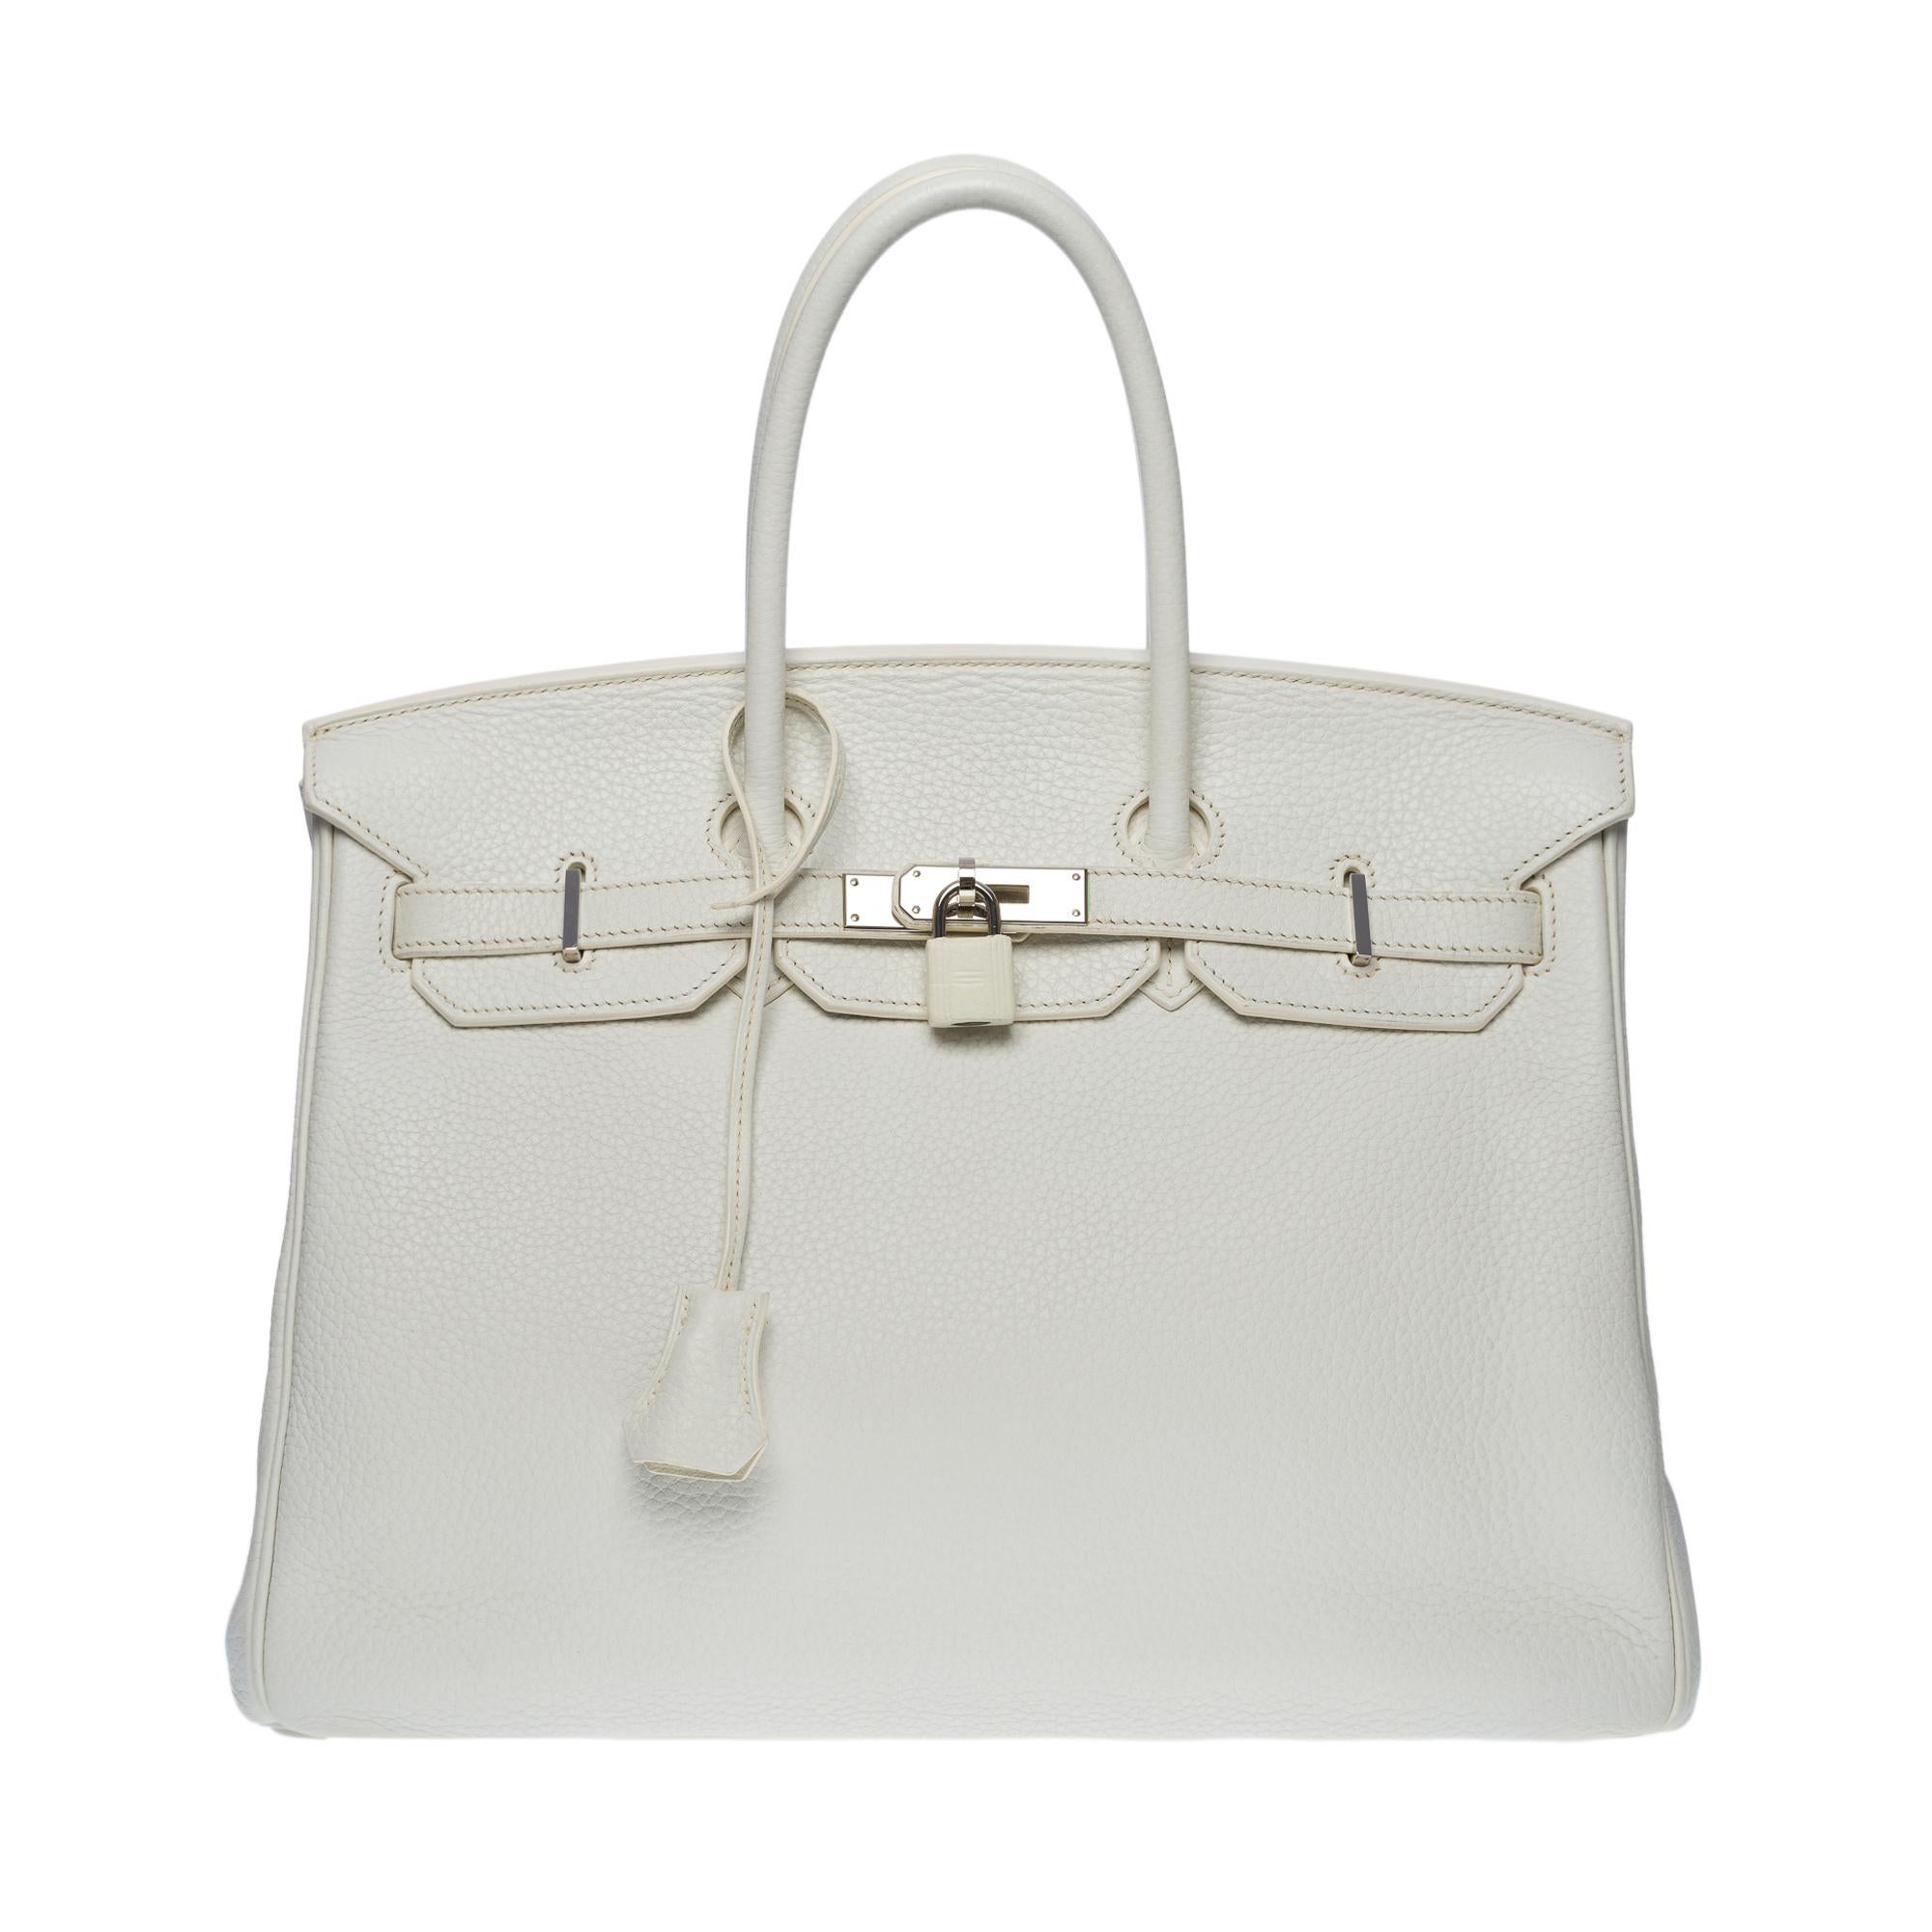 Splendid Hermes Birkin 35 handbag in white Togo leather, palladium silver metal hardware, double white leather handle allowing a hand-carry
Flap closure
White leather lining, one zippered pocket, one patch pocket
Signature: 